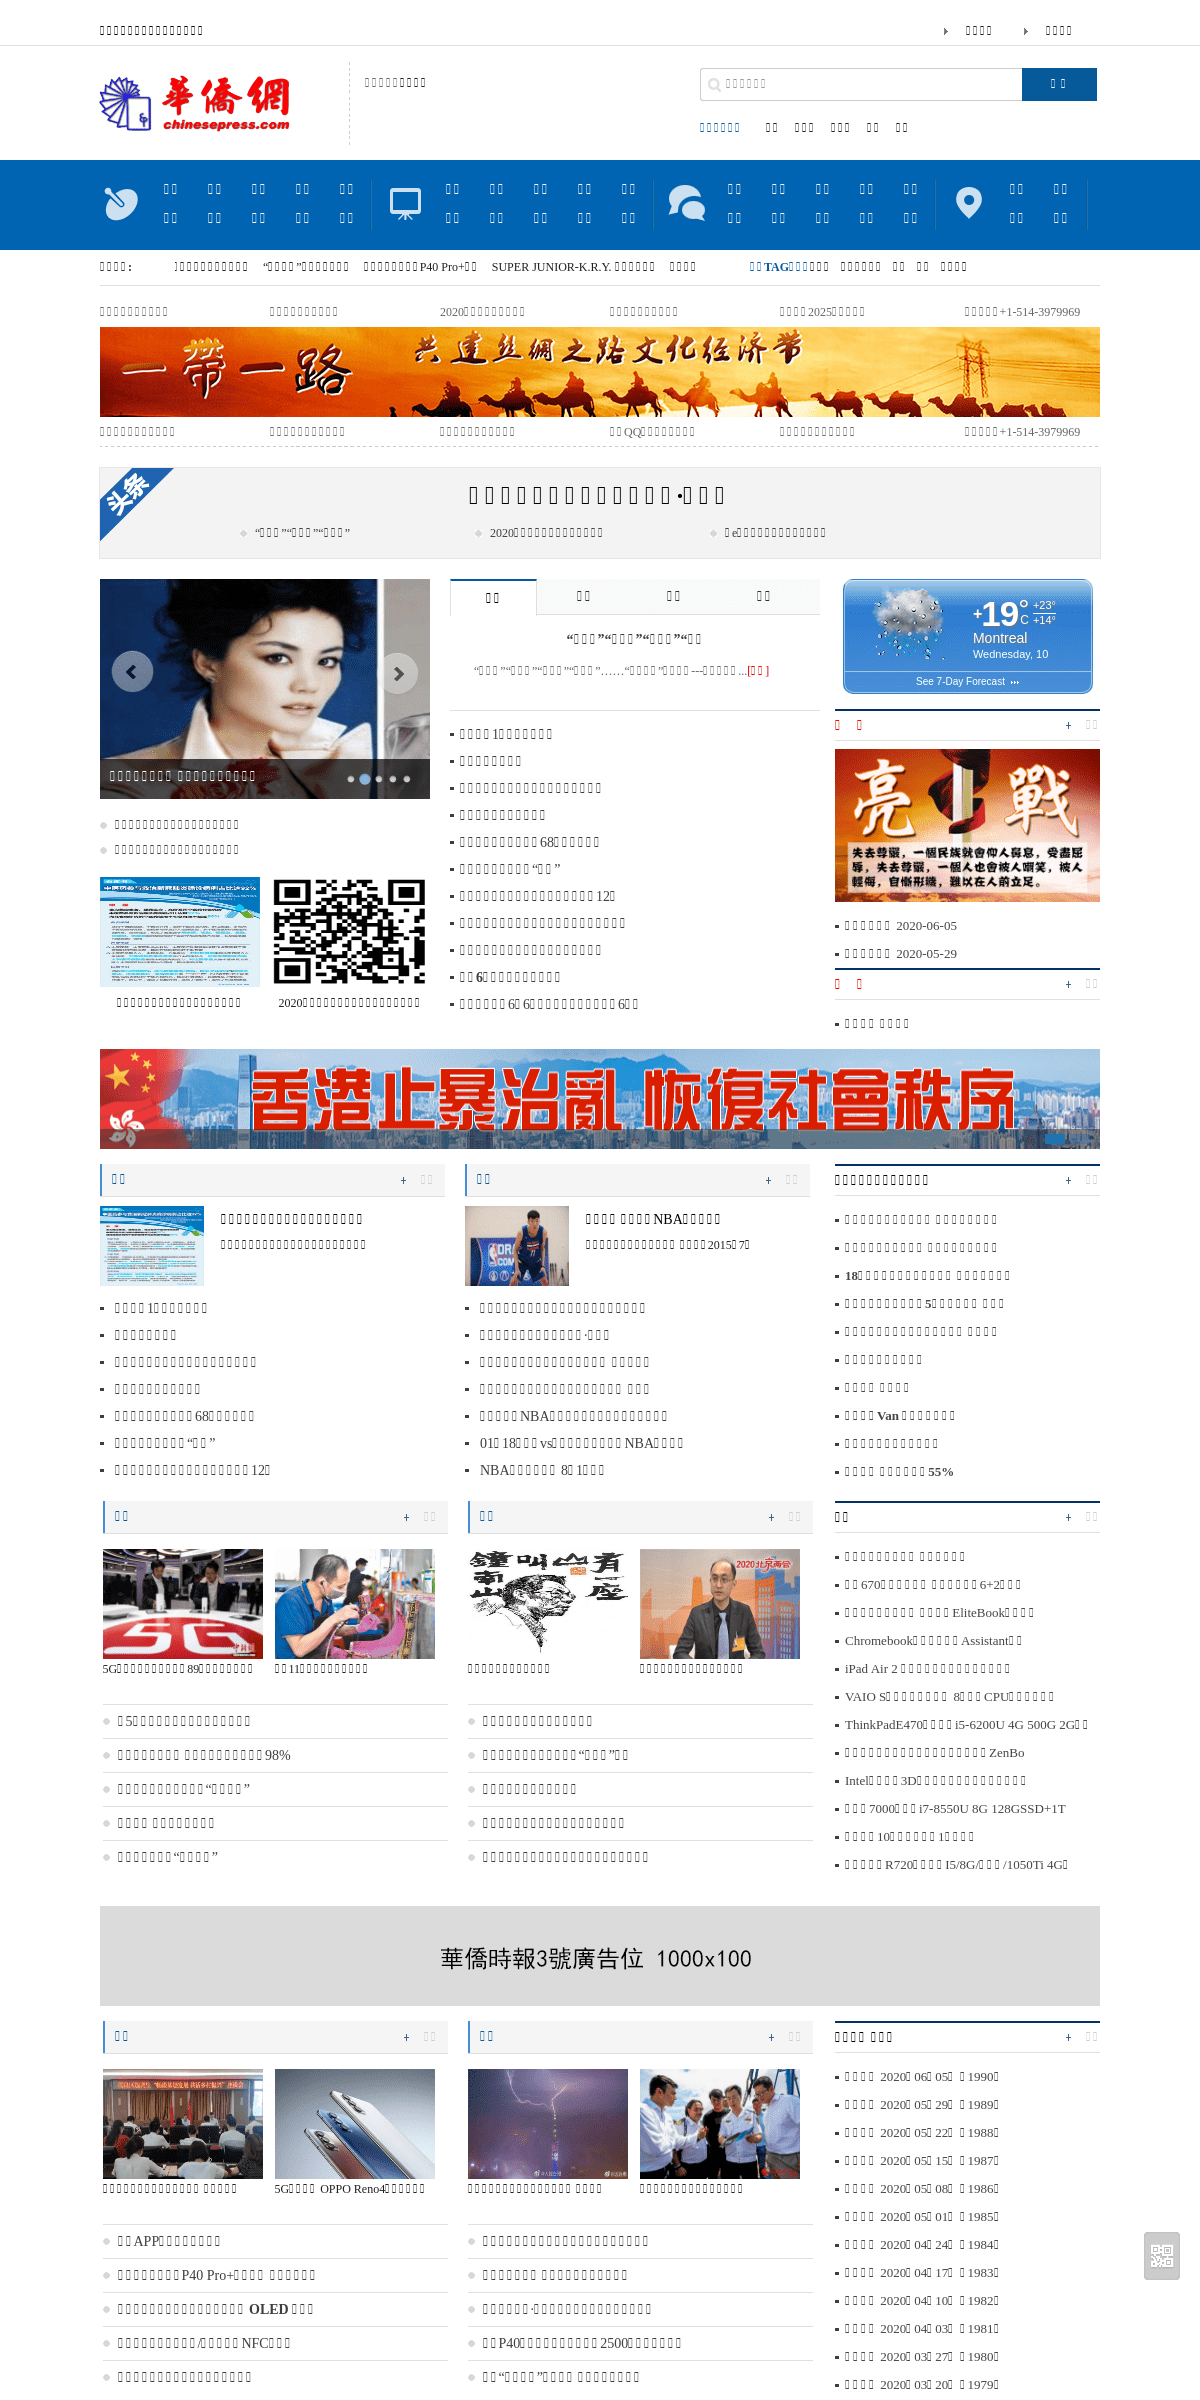 A complete backup of chinesepress.com